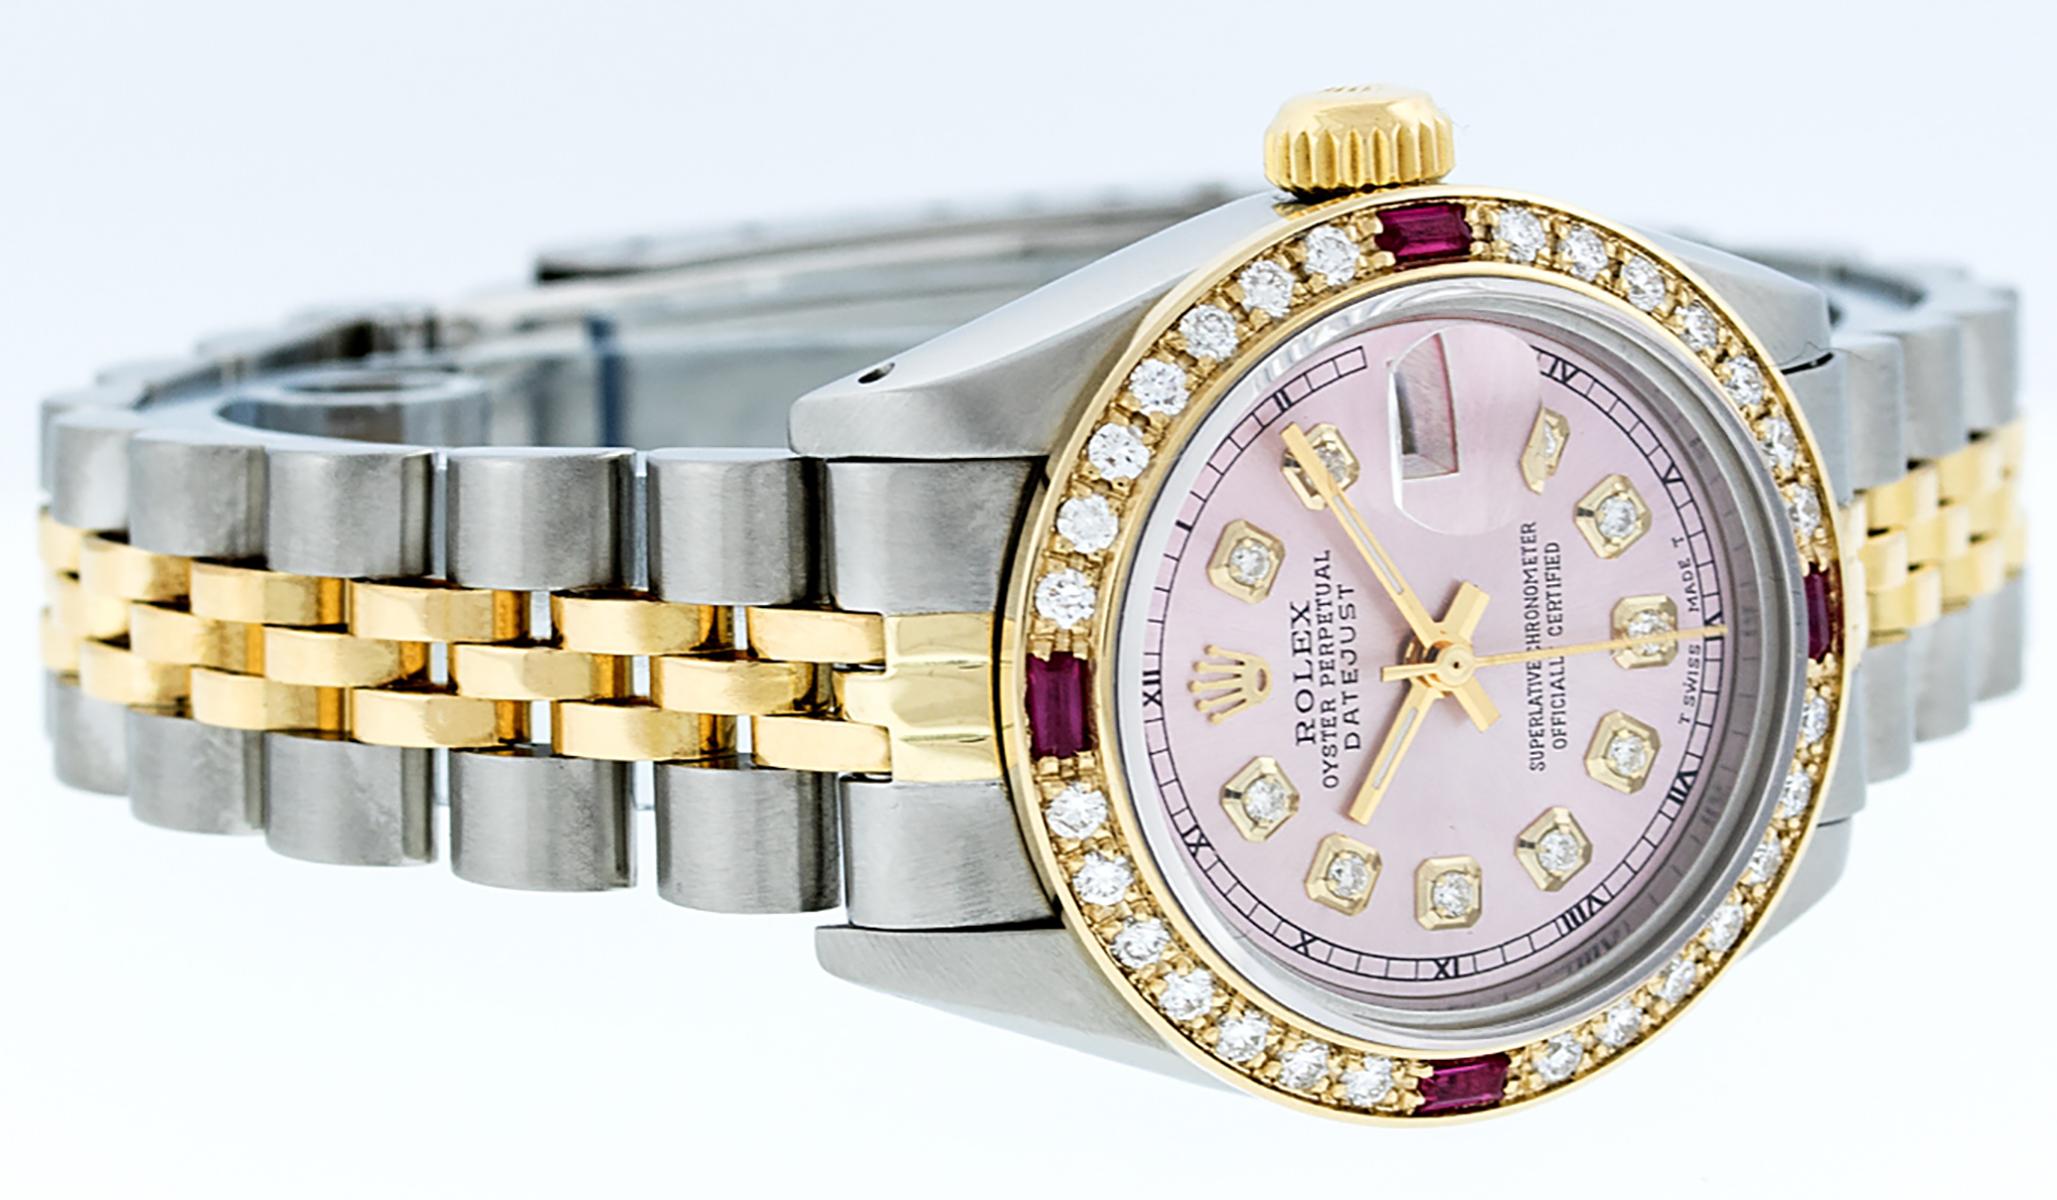 WATCH DESCRIPTION

BRAND : Rolex
MODEL : Datejust
CASE SIZE : 26mm
CASE : Rolex Stainless Steel Case
GENDER : Women's

WATCH FEATURES
 
DIAL : Rolex Professionally Refinished Ice Pink Dial set with aftermarket Genuine Round (VVS H Color) Diamond